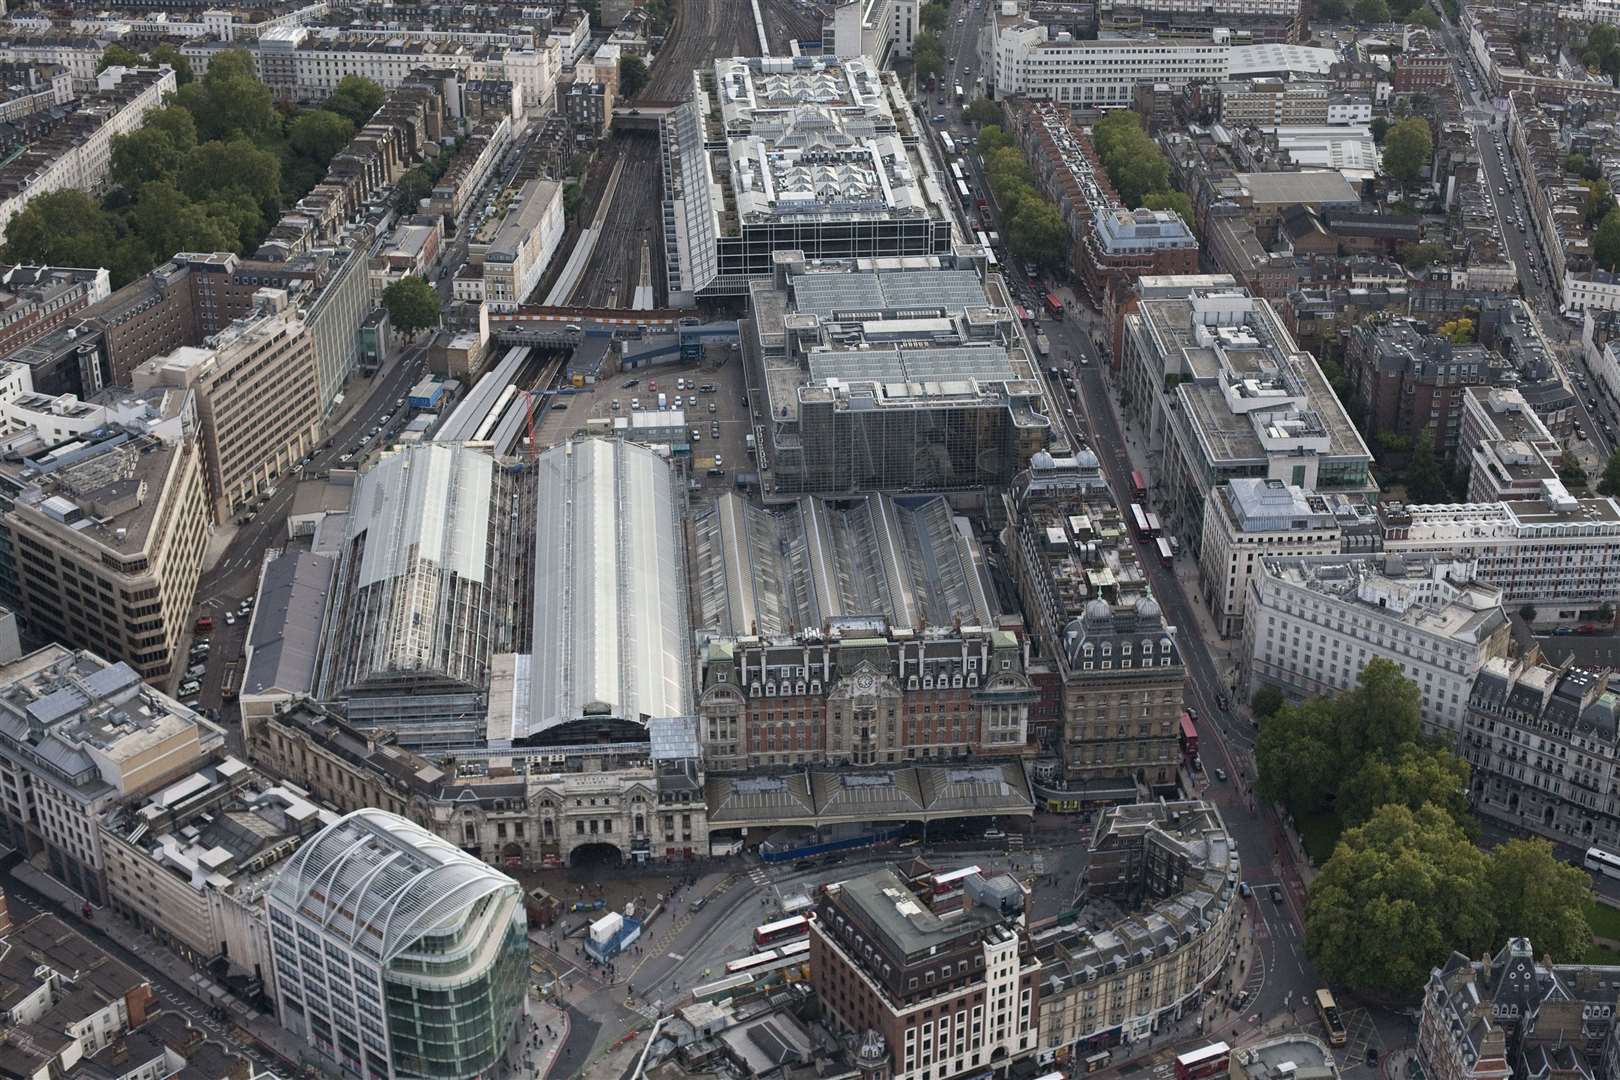 The accident happened outside London's Victoria Station. Picture: Ralph Hodgson/Network Rail